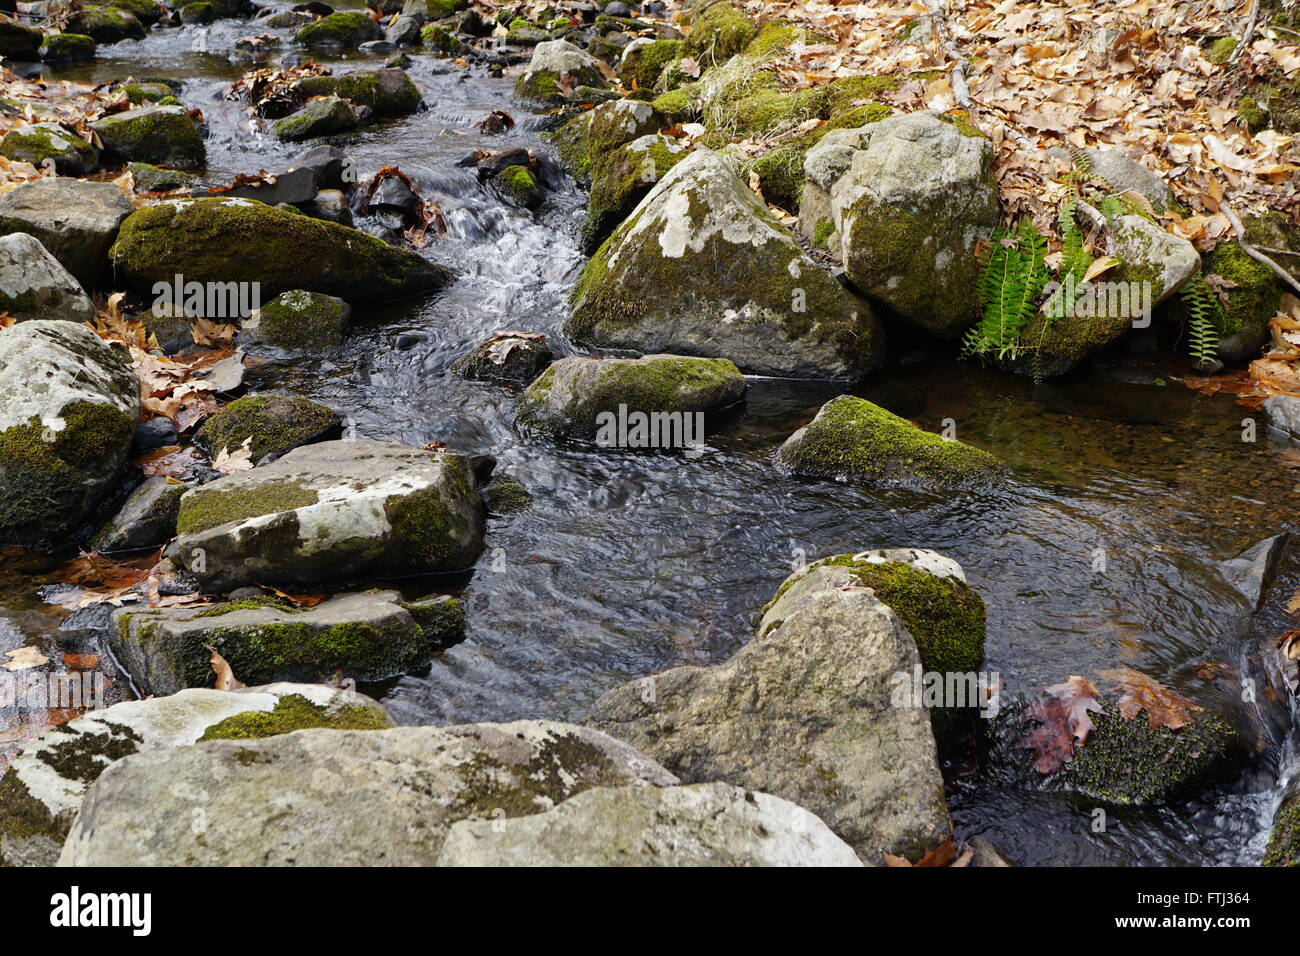 A stream flowing through a temperate forest in Spring. Stock Photo